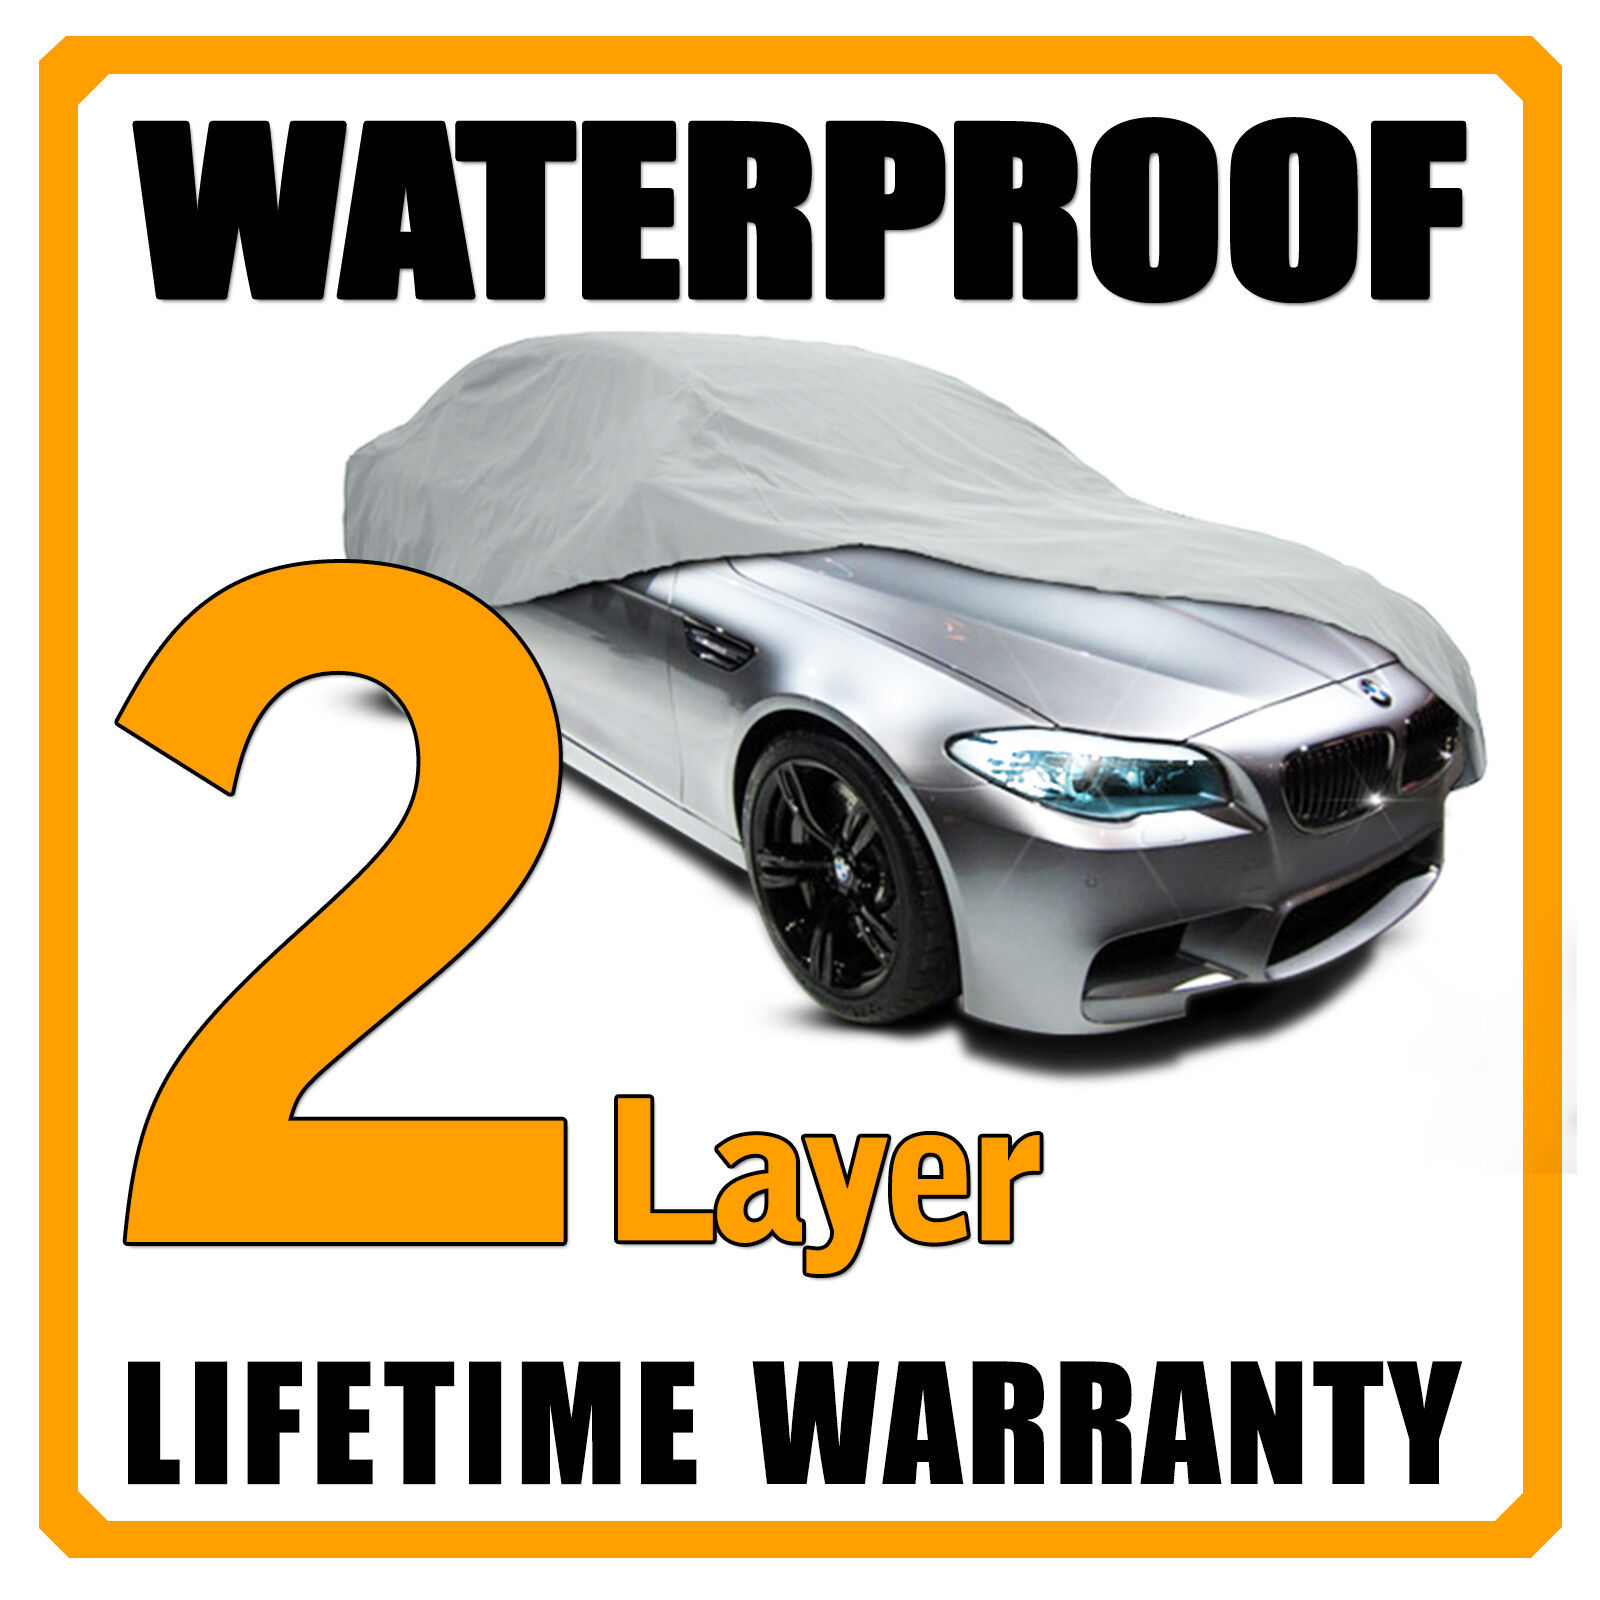 2 Layer Car Cover Breathable Waterproof Layers Outdoor Indoor Fleece Lining Fit